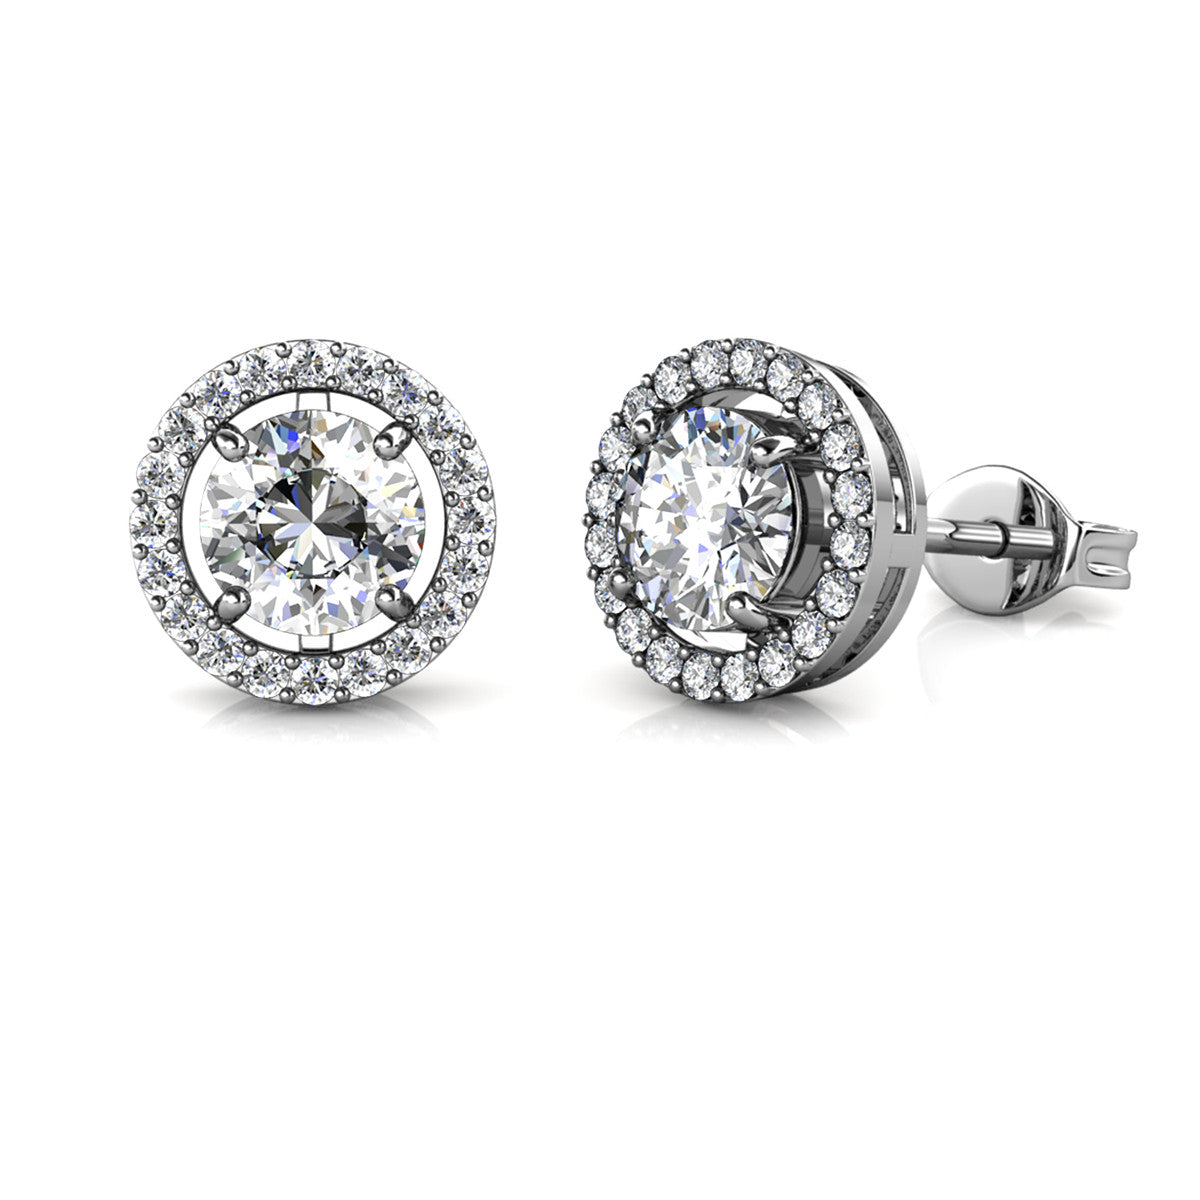 Moissanite by Cate & Chloe Kailani Sterling Silver Stud Earrings with Moissanite Crystals